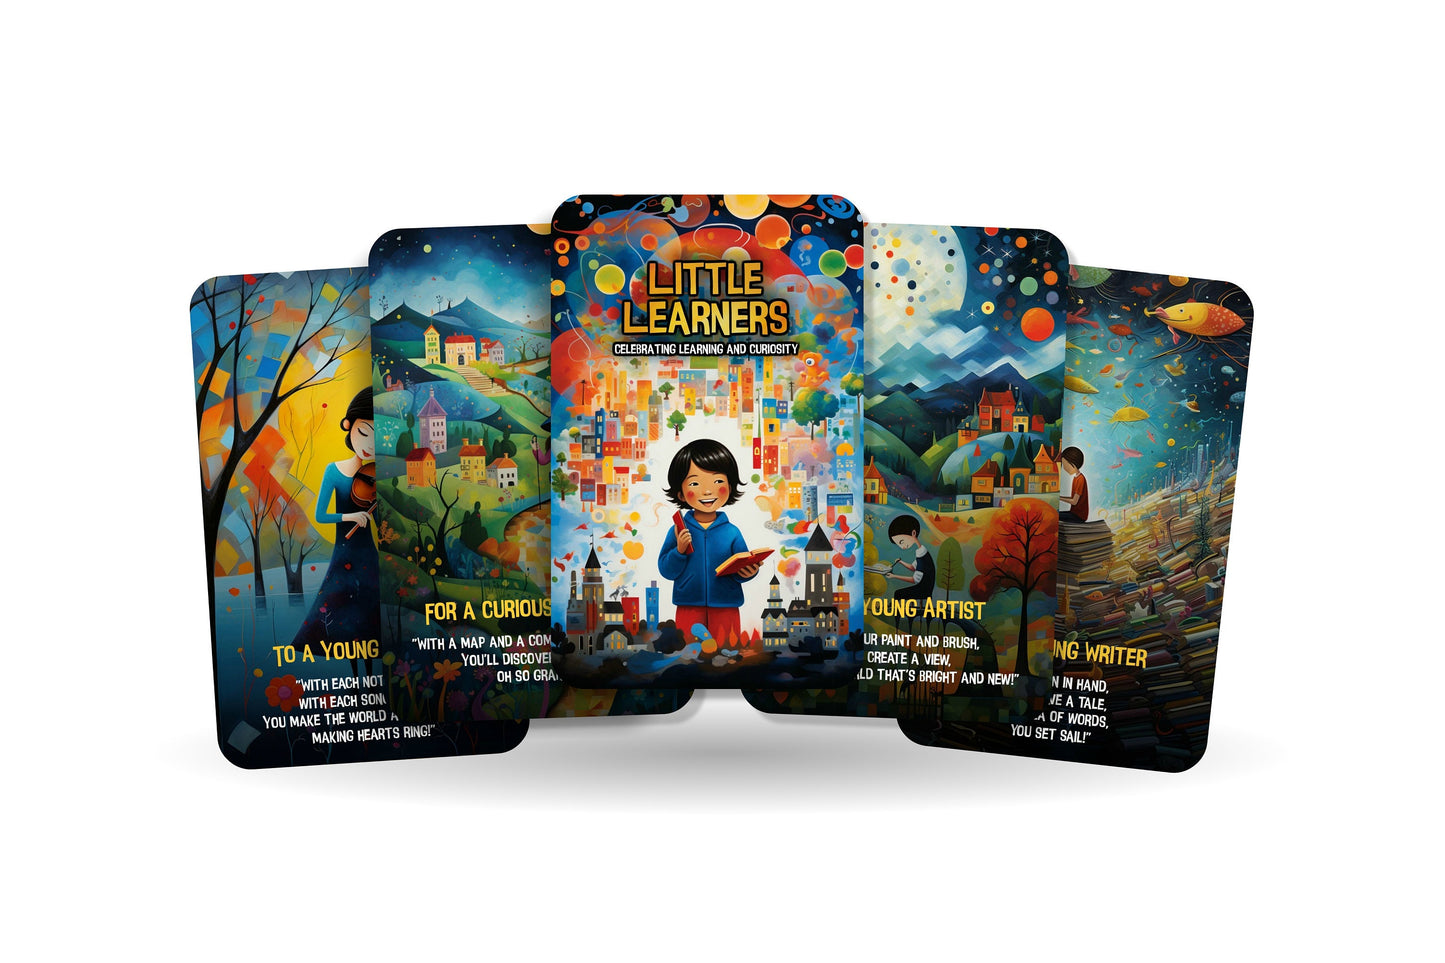 Little Learners - Celebrating Learning and Curiosity, Kids Affirmation Cards, A Journey Through Rhymes